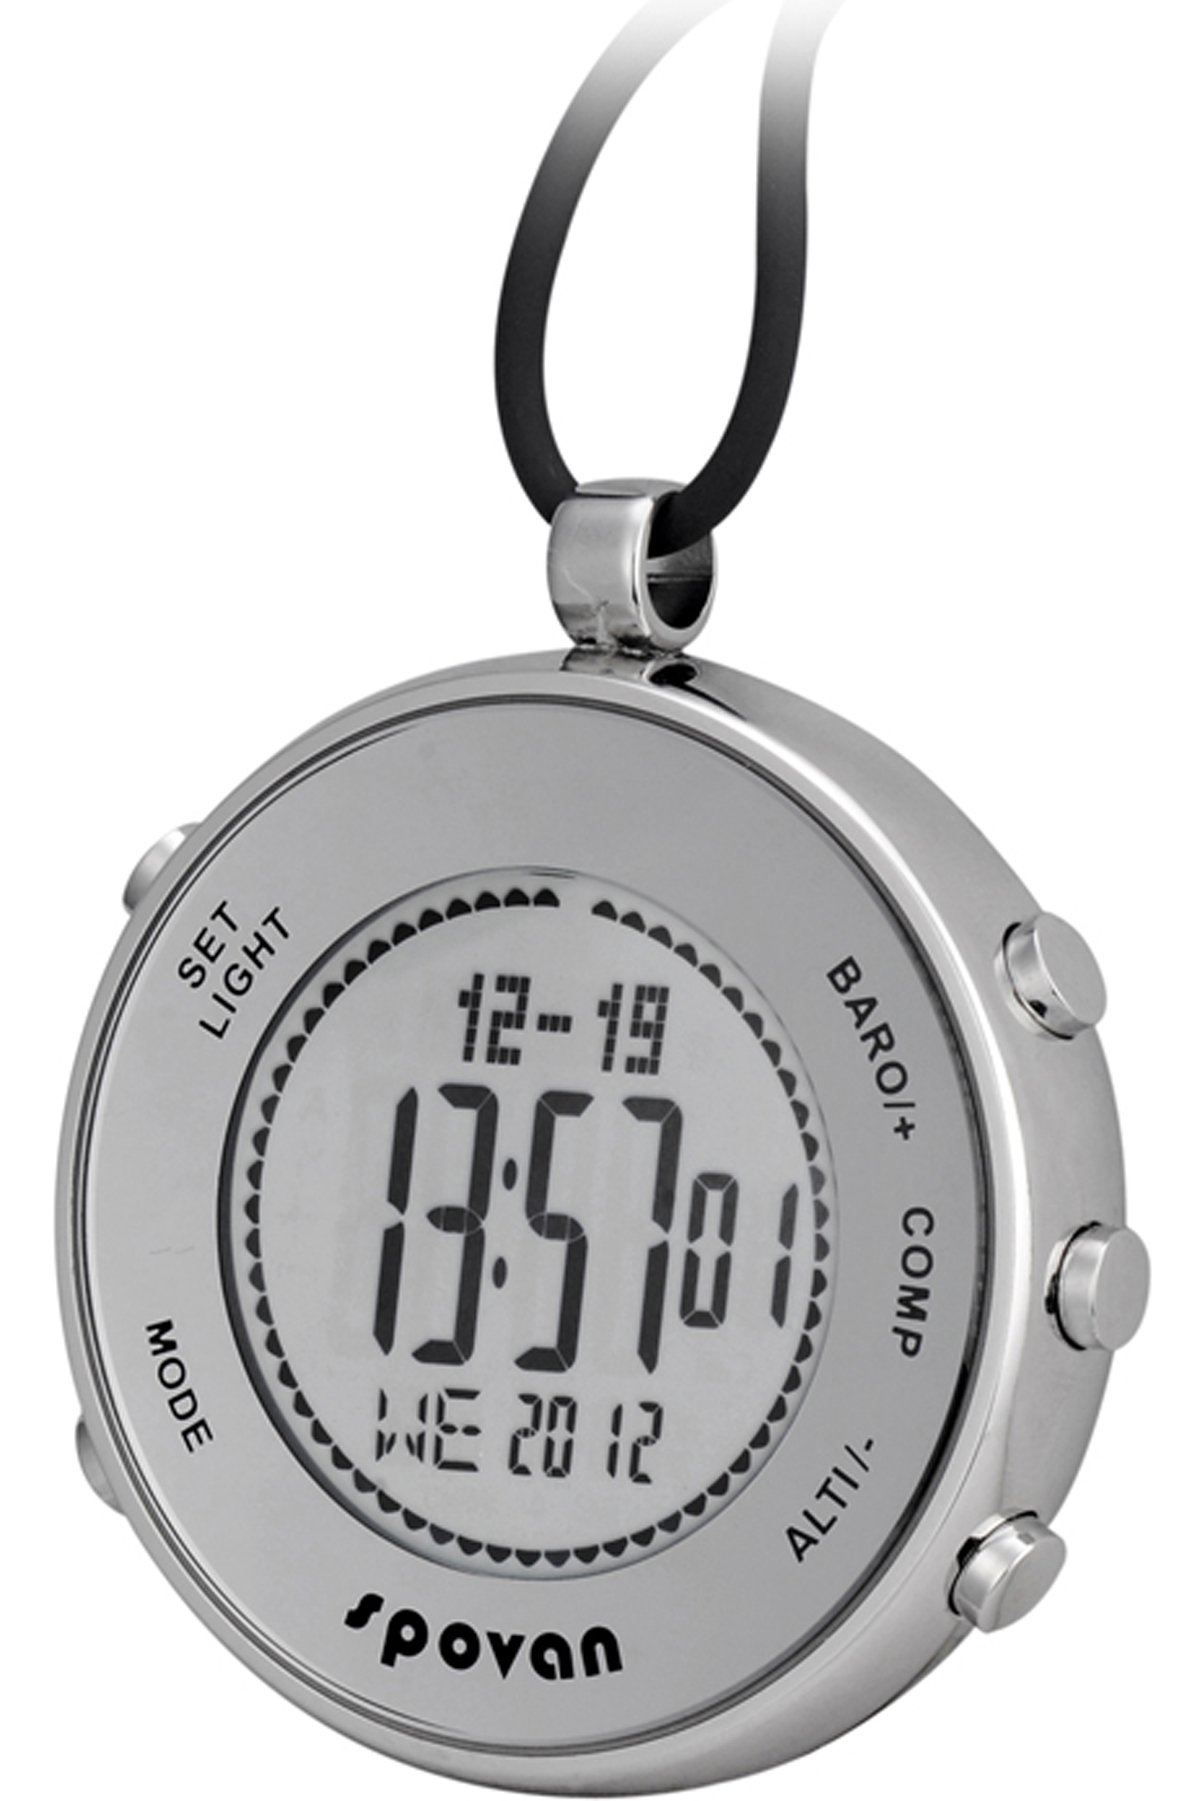 Pocket Clip Watches Silver Digital Sports Hiking Altimeter Barometer Compass